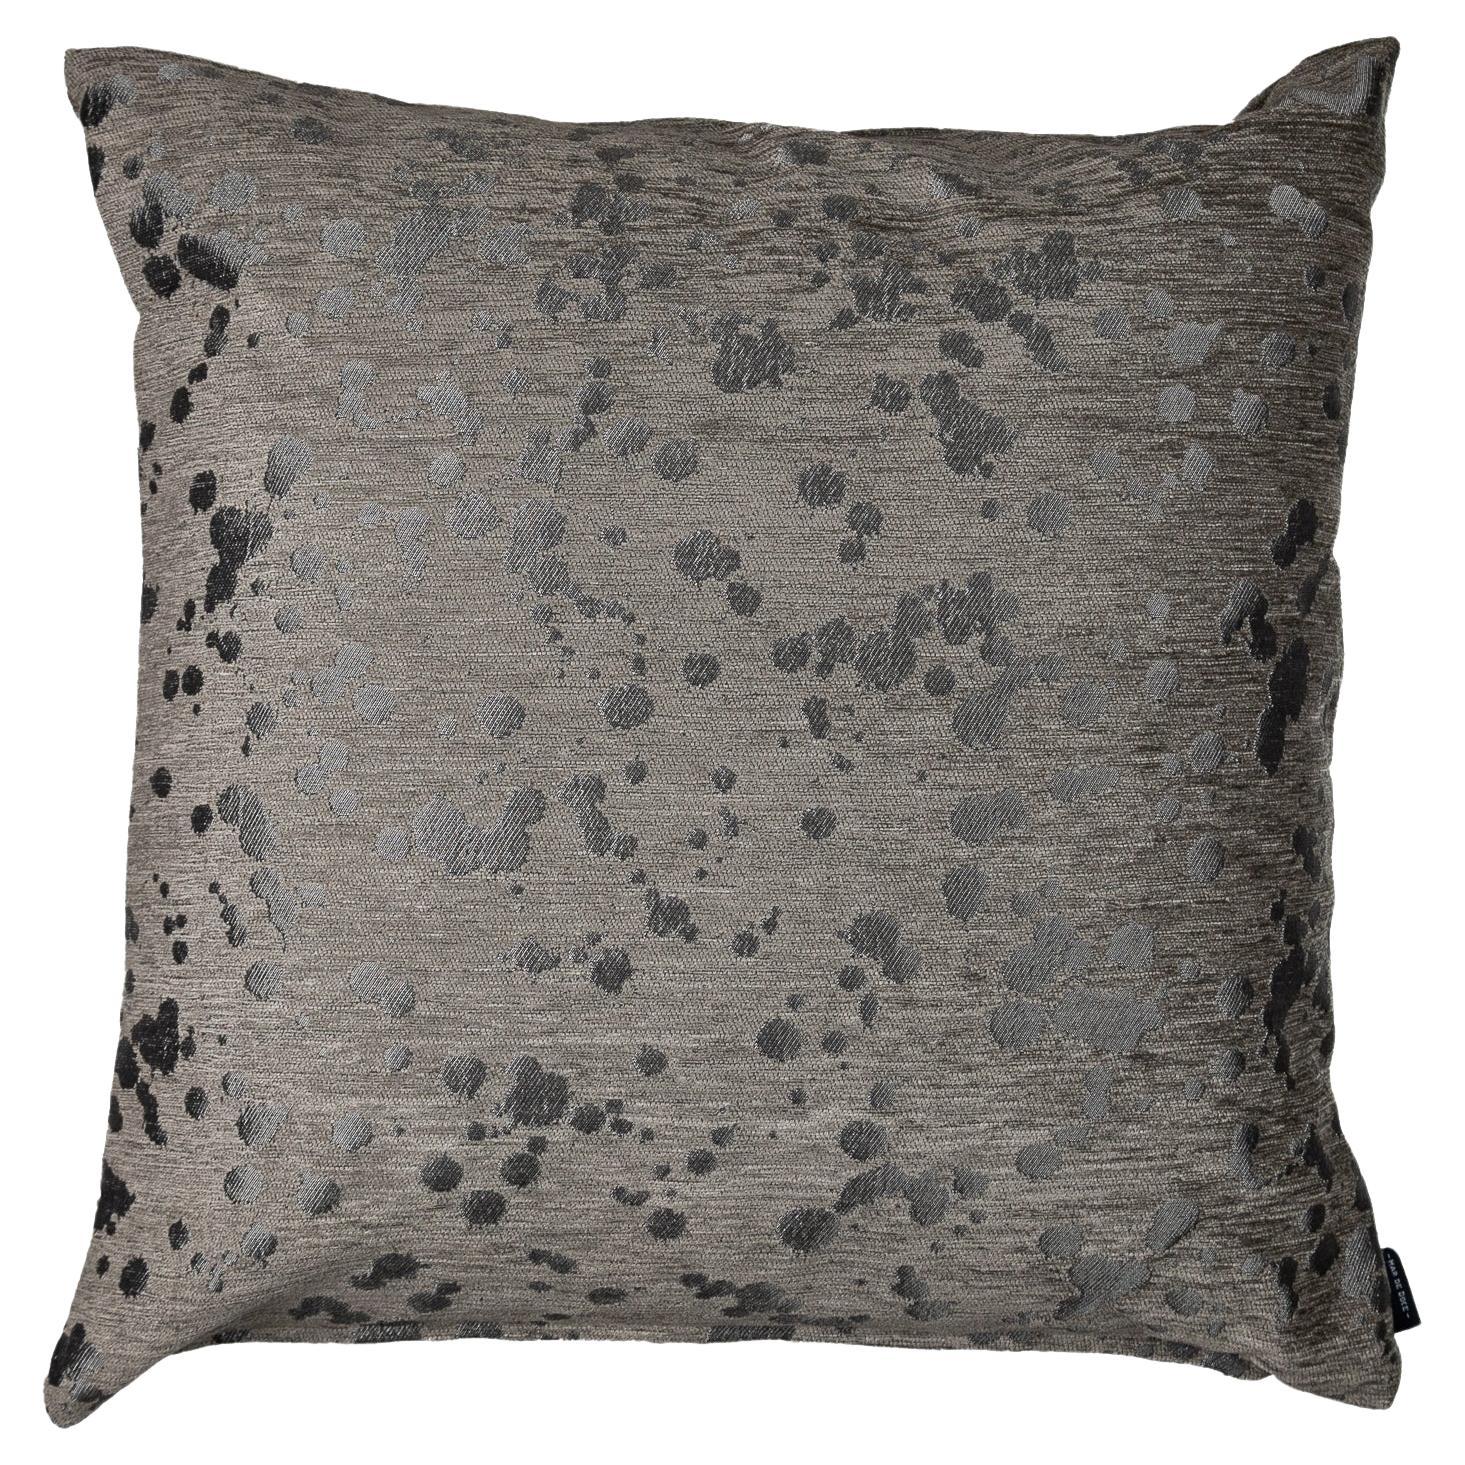 RAIN- Gray throw pillow in imported fabrics that resemble rain by Mar de Doce